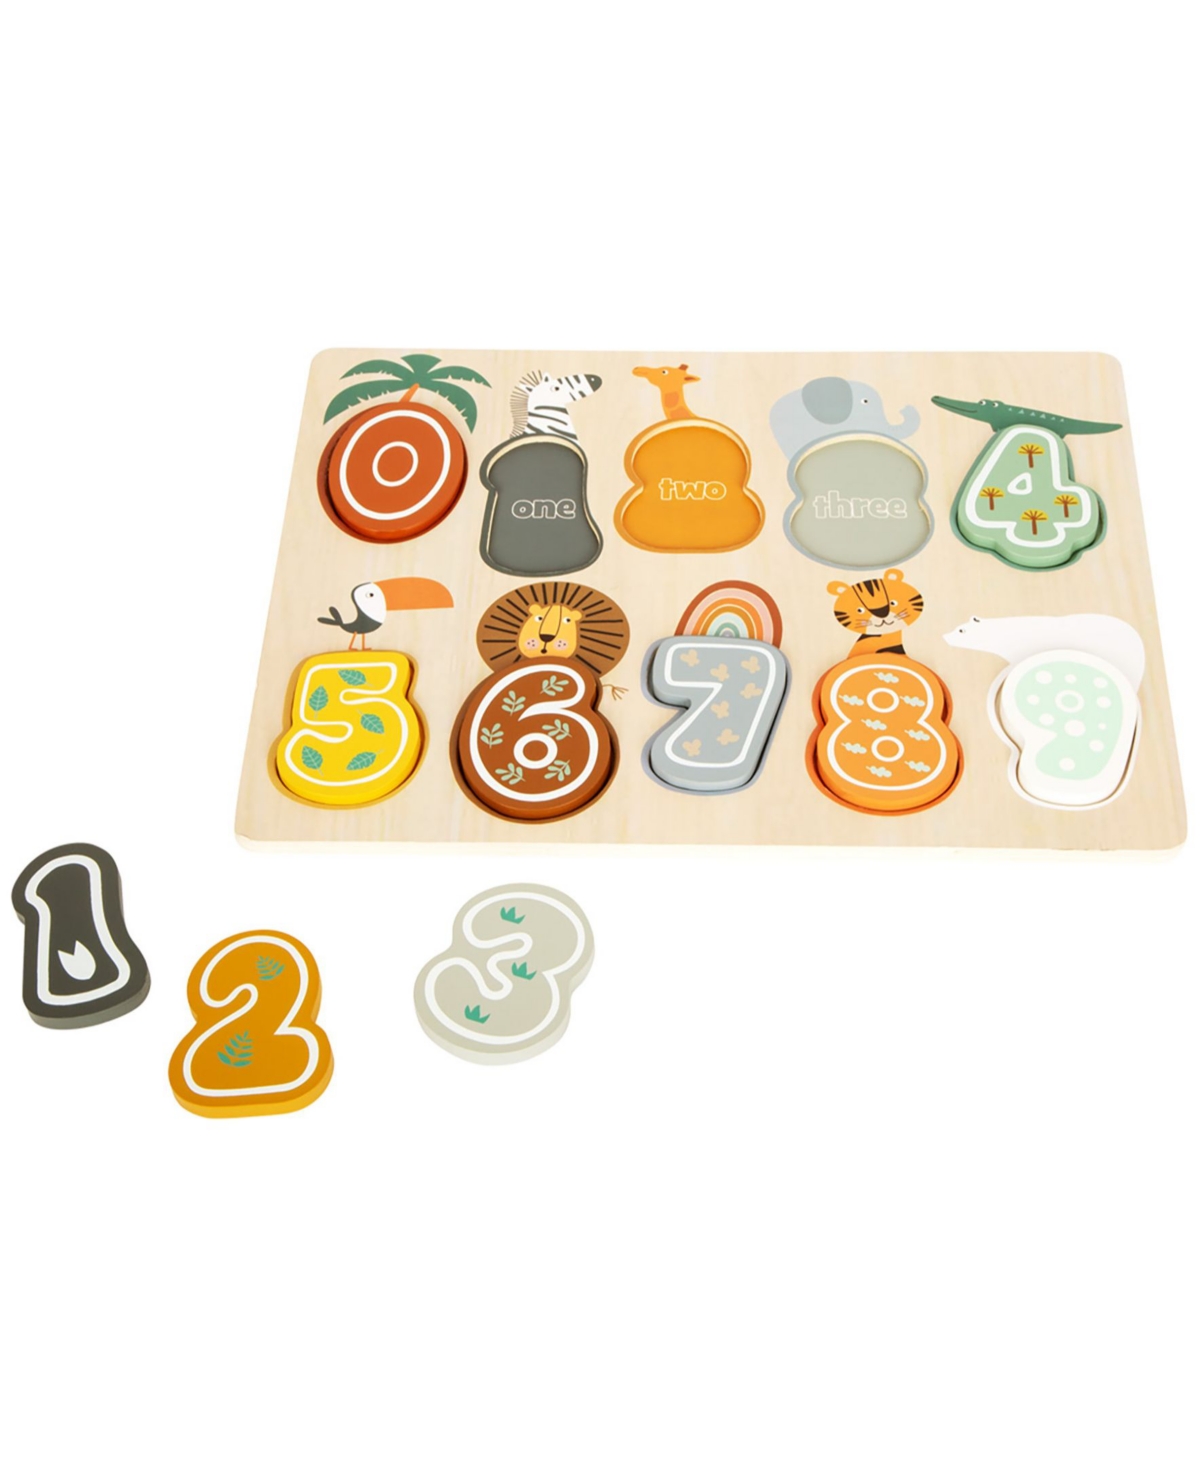 Flat River Group Babies' Small Foot Wooden Toys Safari Themed Number Puzzle, 10 Piece In Multi